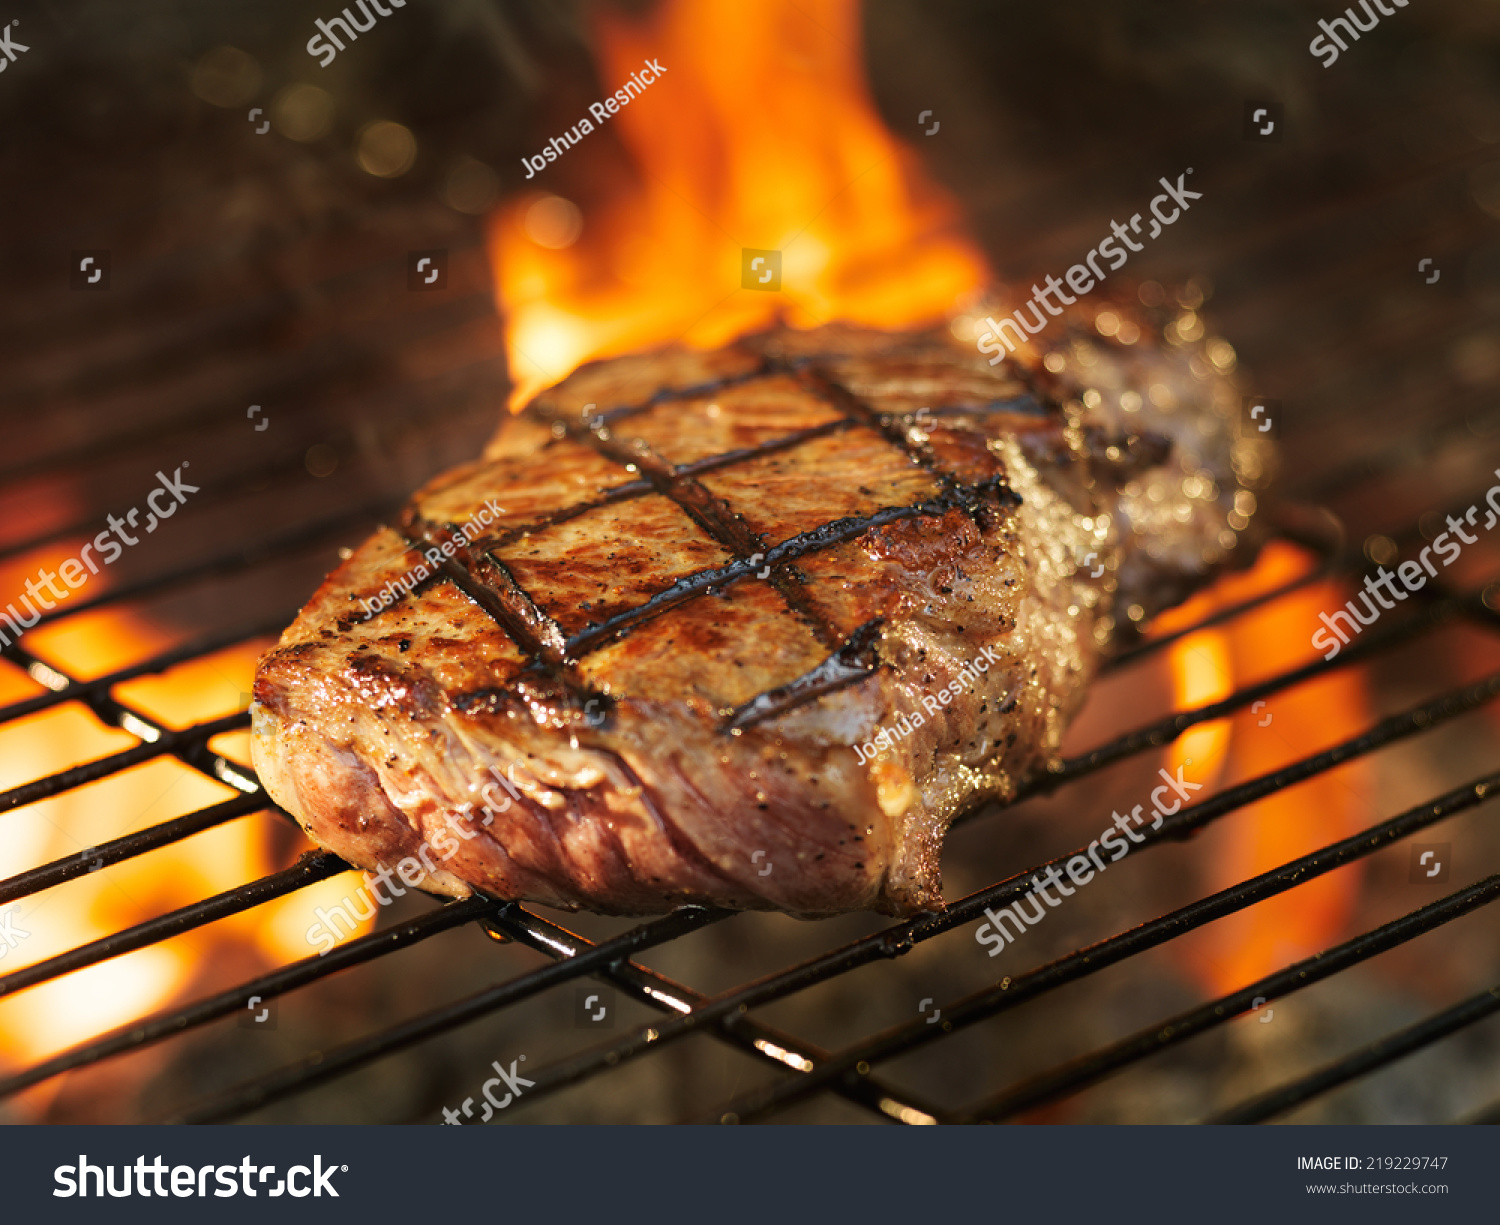 Beef Steak Cooking Over Flaming Grill Stock Photo 219229747 - Shutterstock